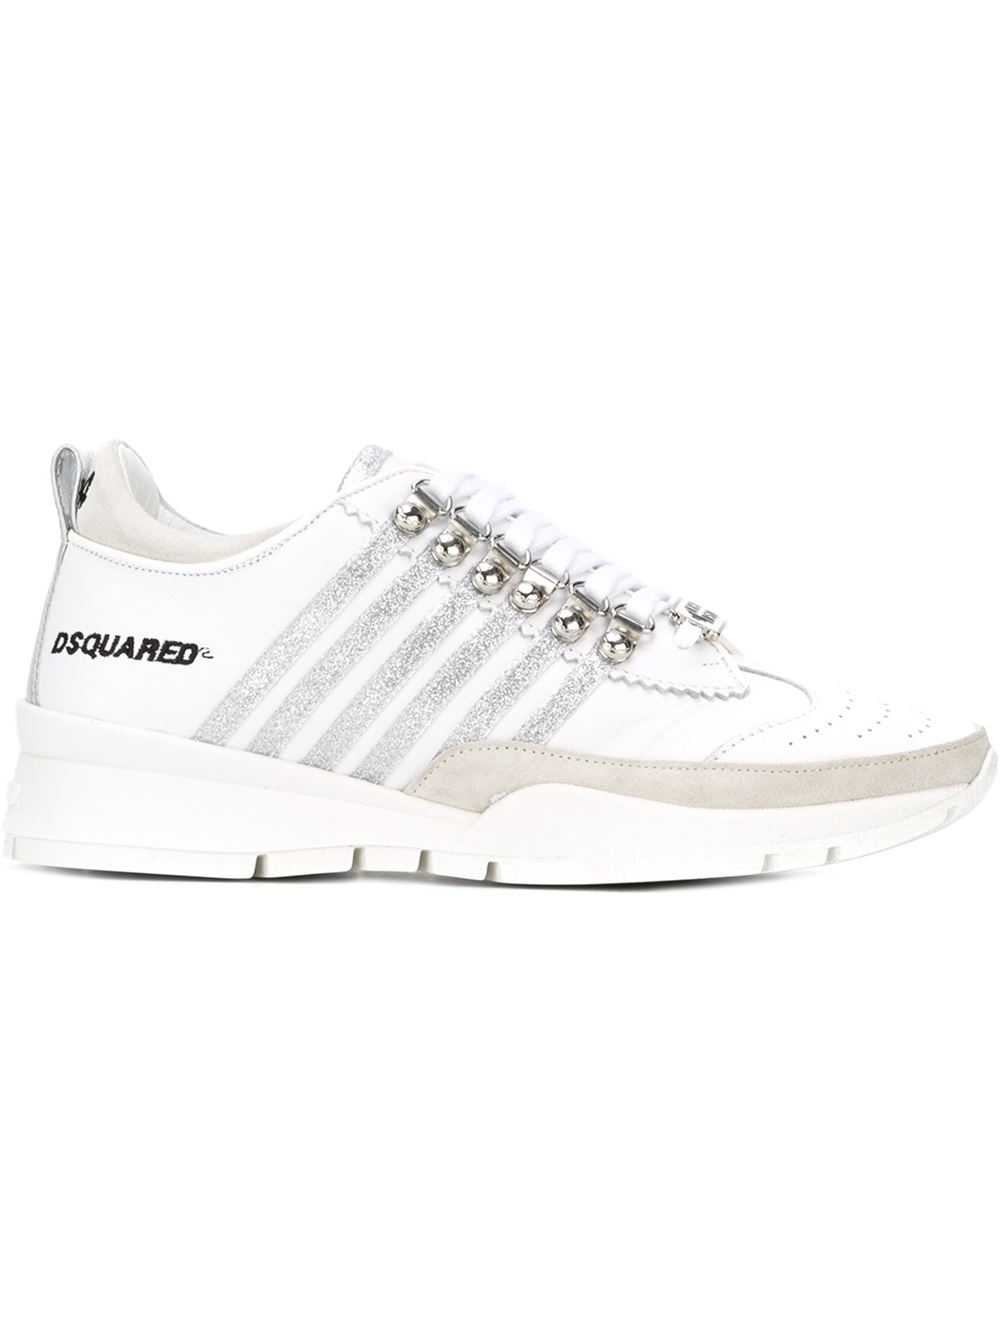 dsquared sneakers soldes